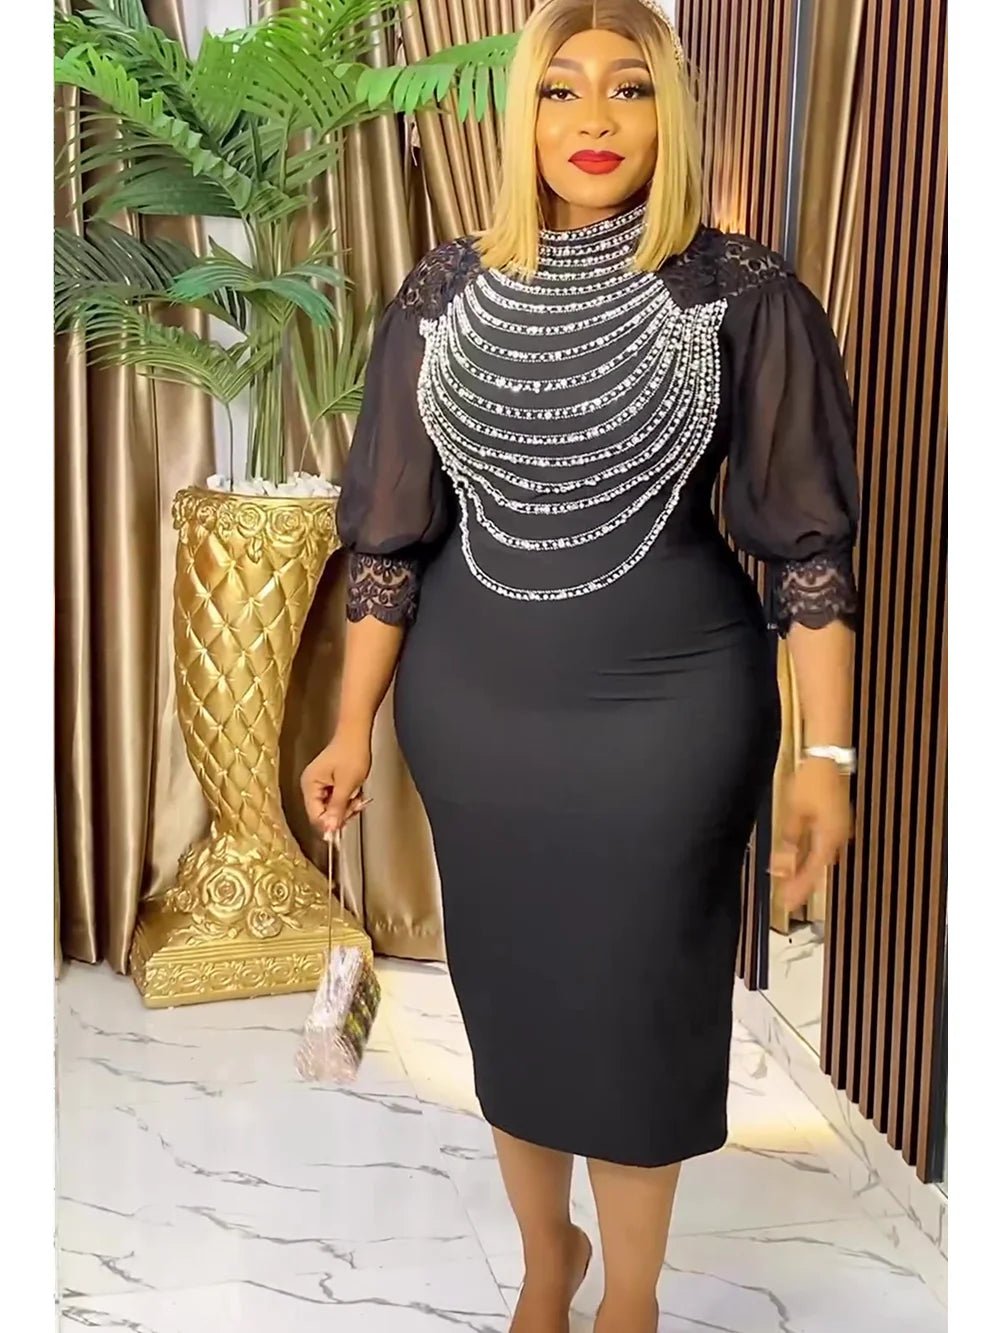 Plus Size Luxury Evening Dresses: African Inspired Robes for Wedding Parties, Featuring Dashiki - Flexi Africa - Flexi Africa offers Free Delivery Worldwide - Vibrant African traditional clothing showcasing bold prints and intricate designs